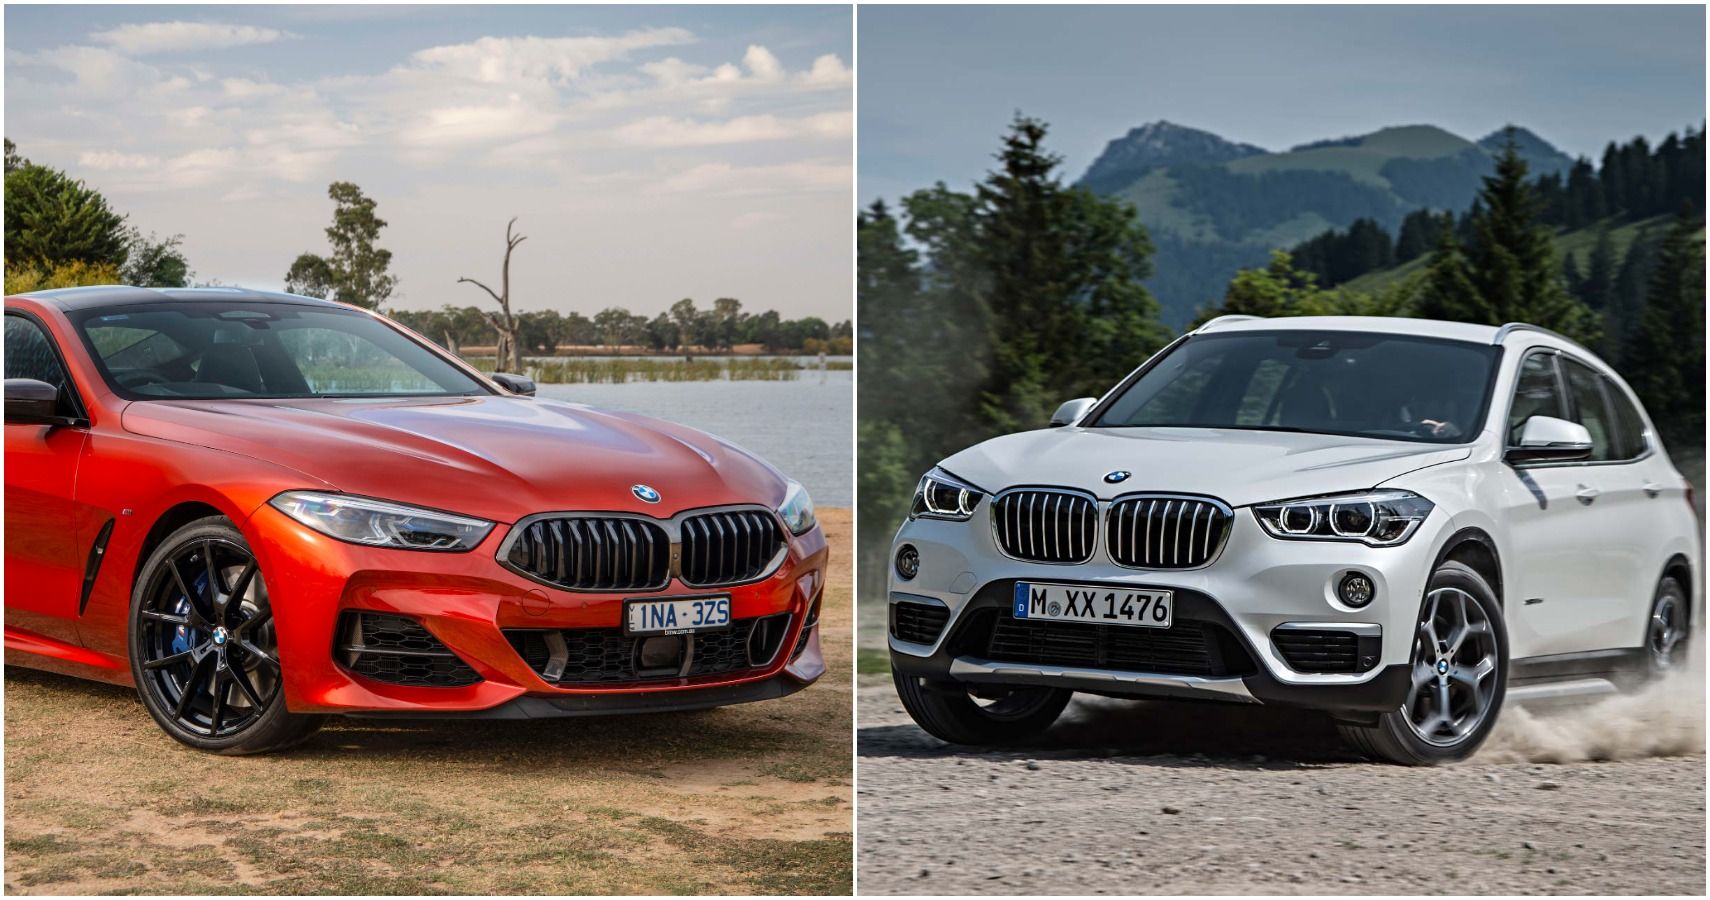 10 Of The Best BMW Car Models On The Market | HotCars